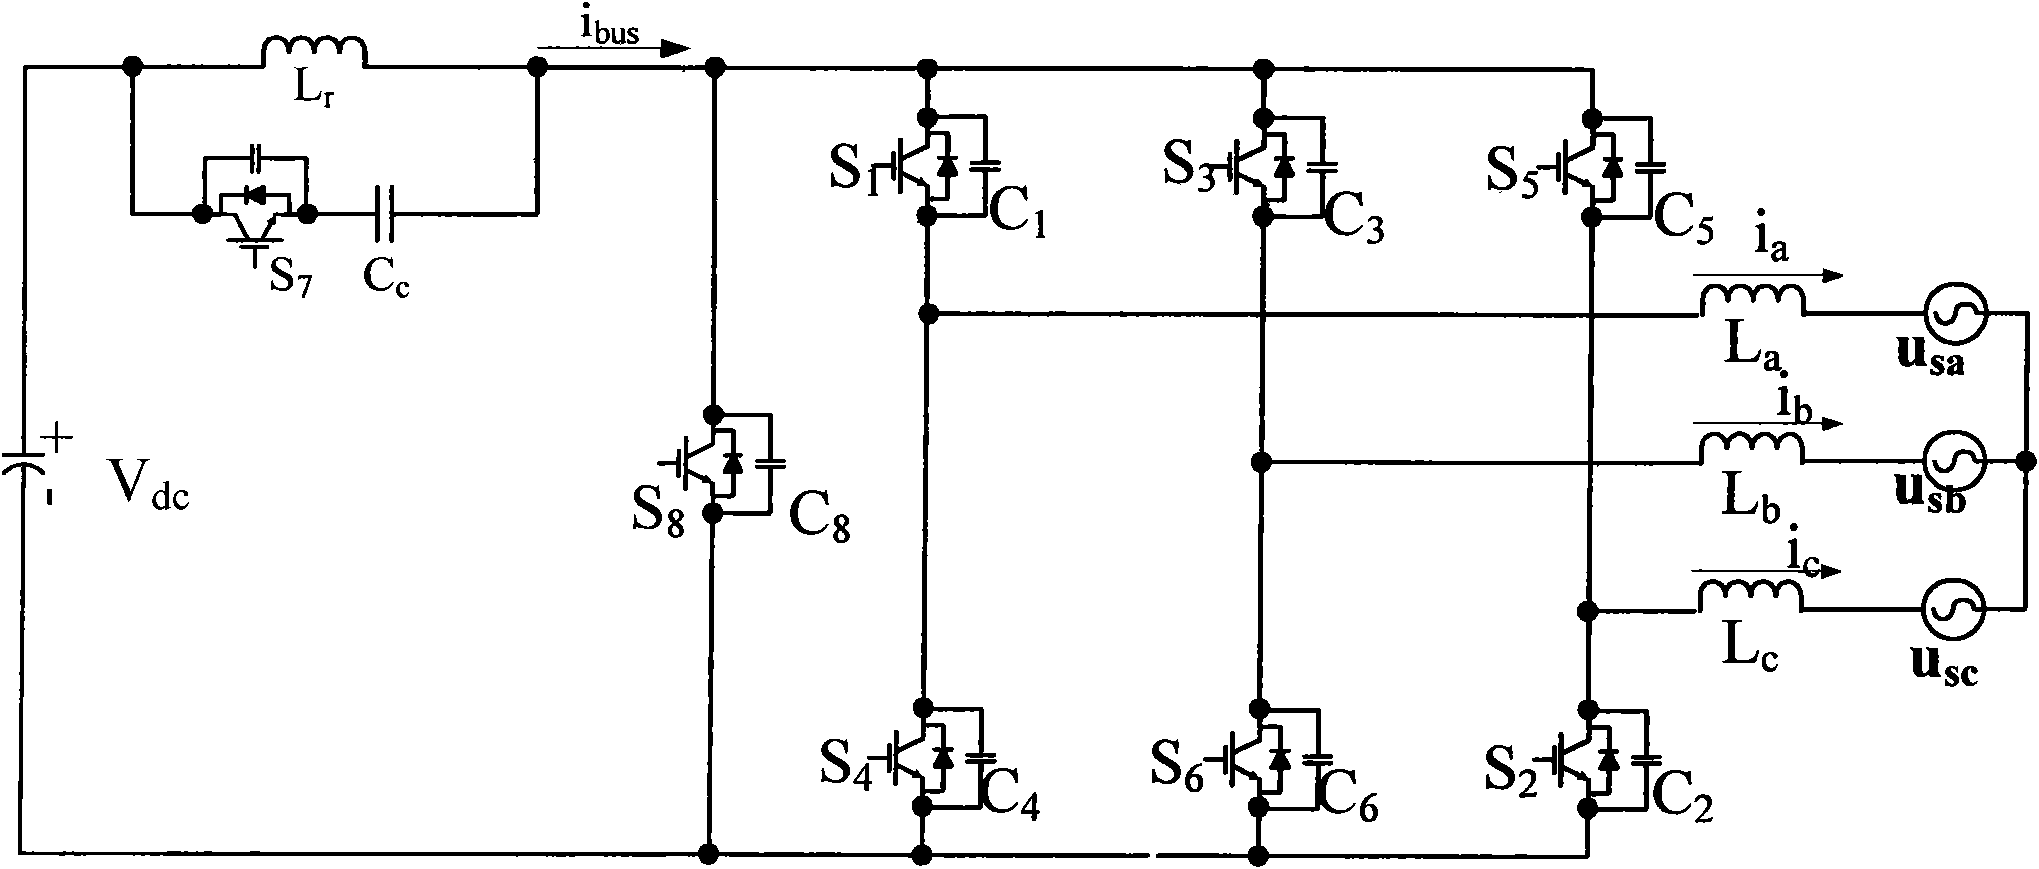 Soft switching three-phase gird-connected inverter additionally provided with freewheeling path